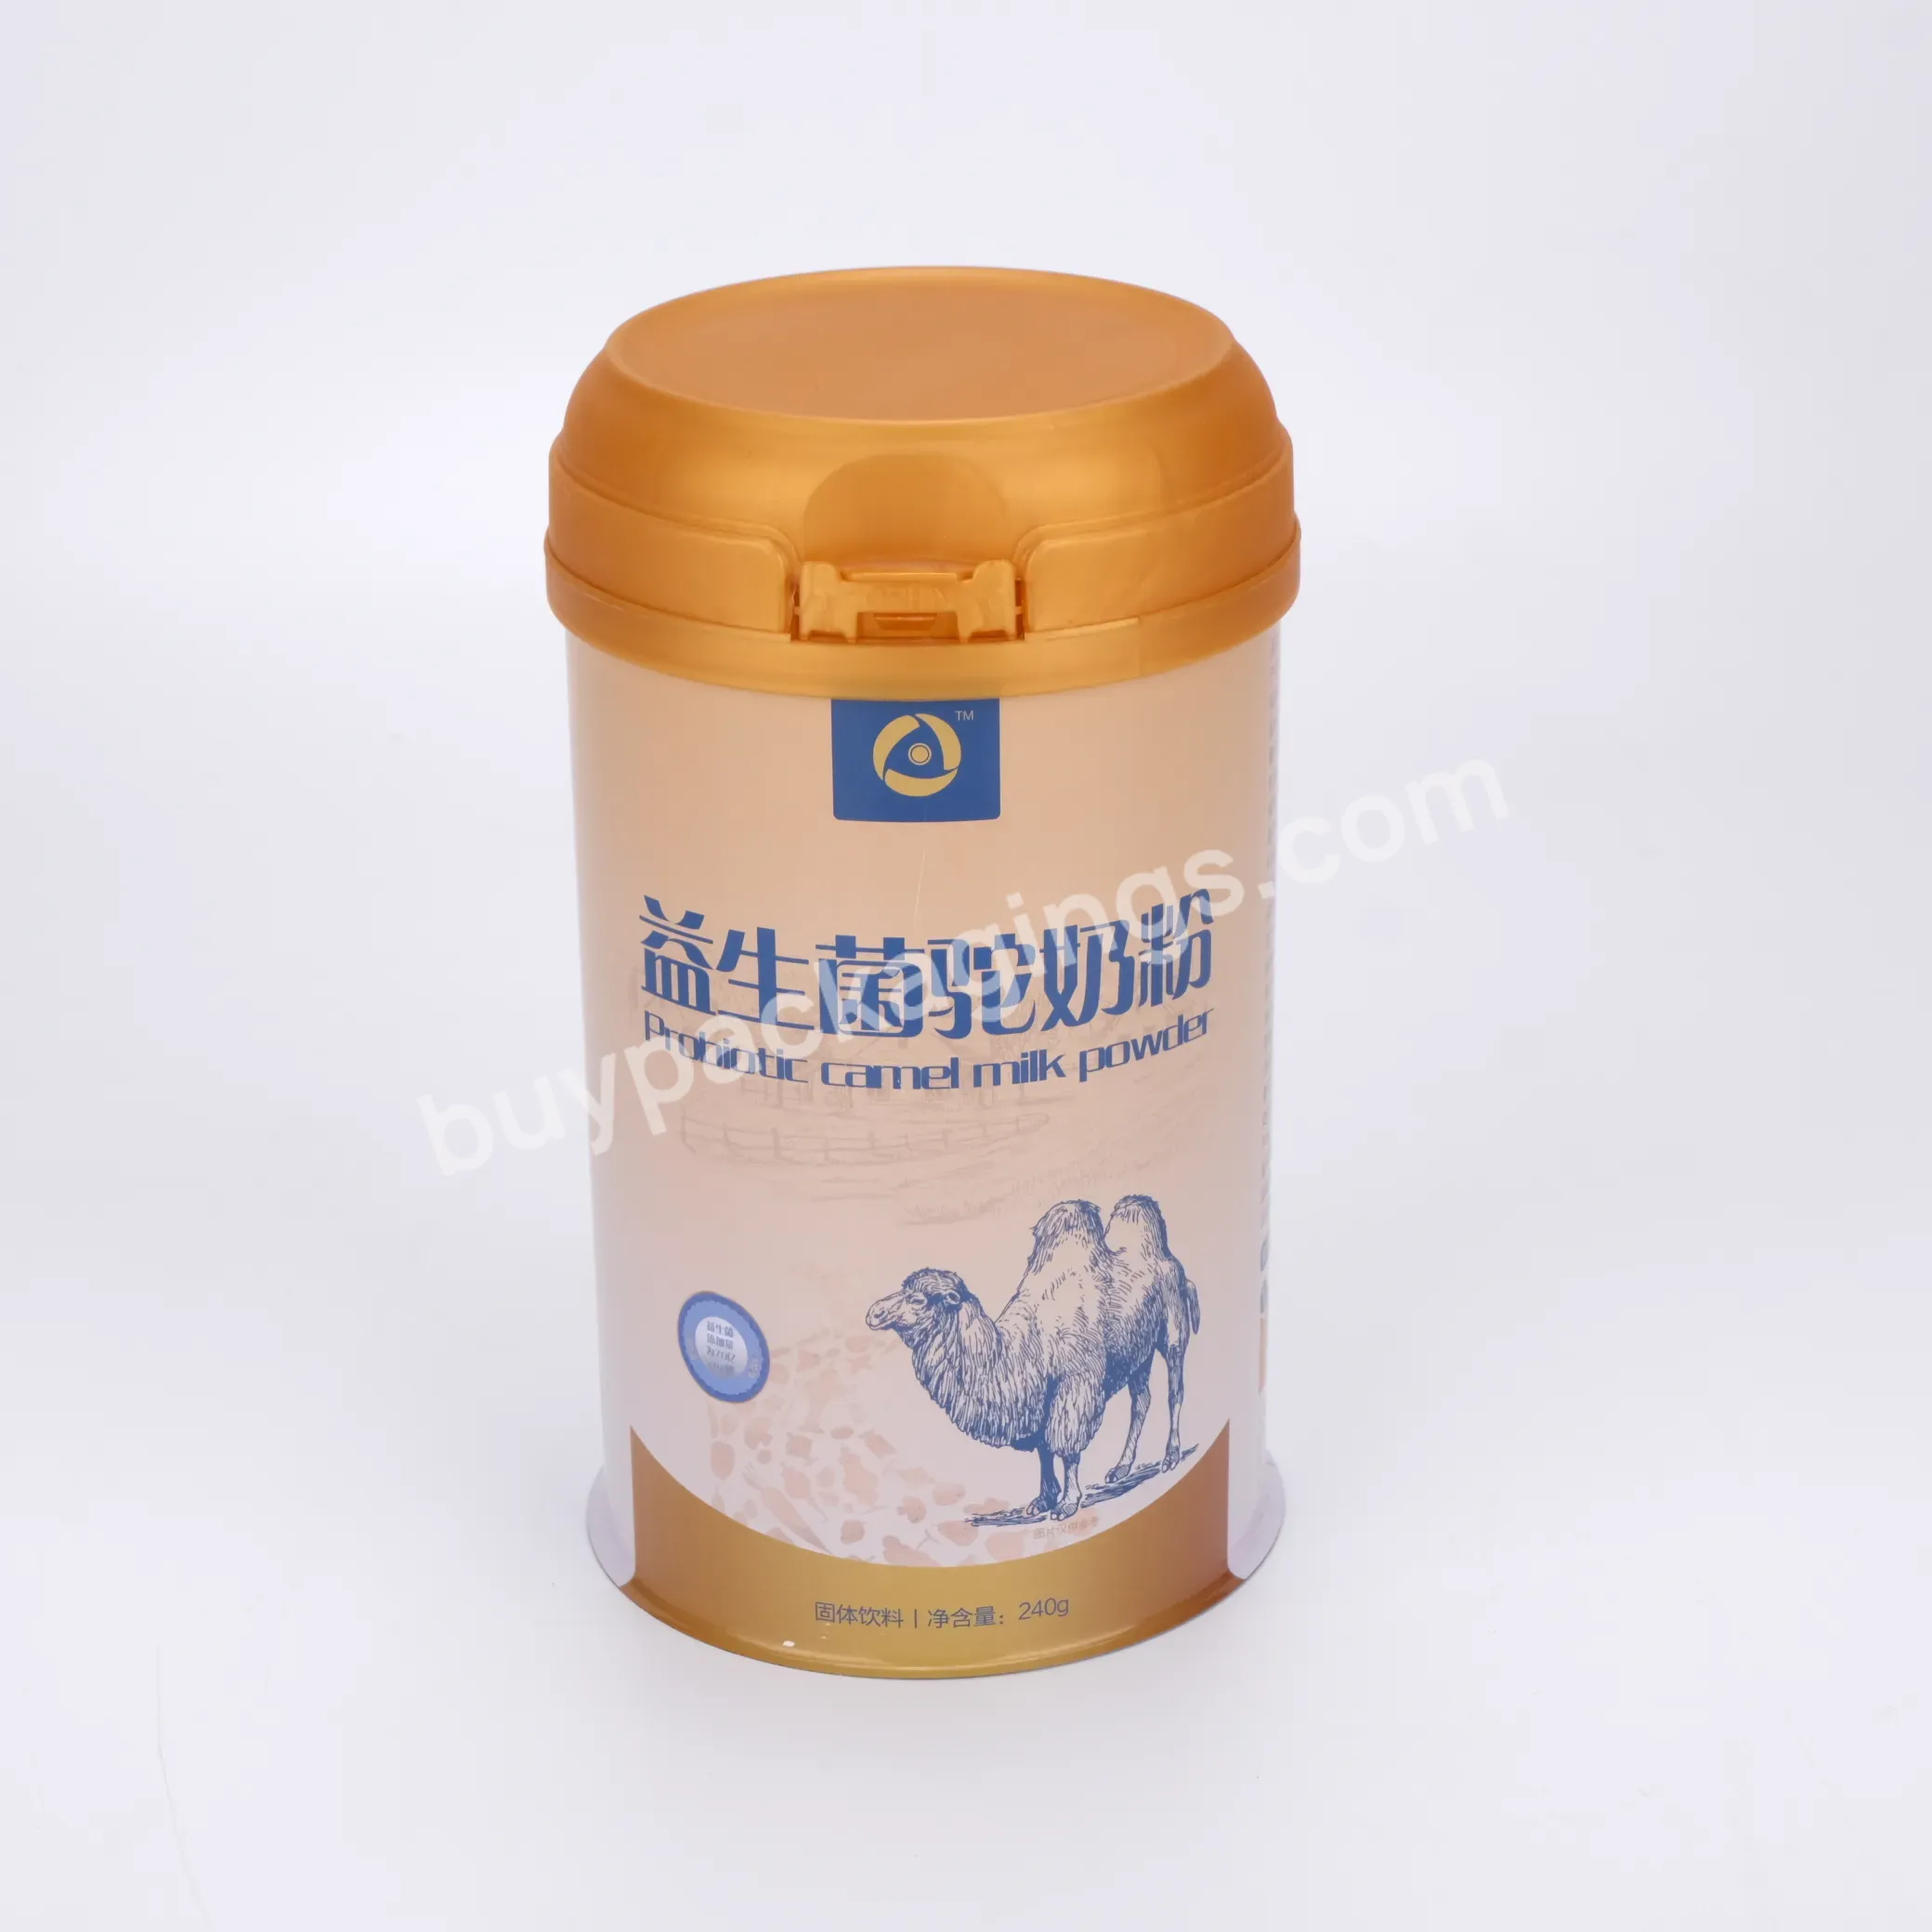 Metal Milk Powder Sell In Bulk Can Moisture Proof With Double Cover For Business Use